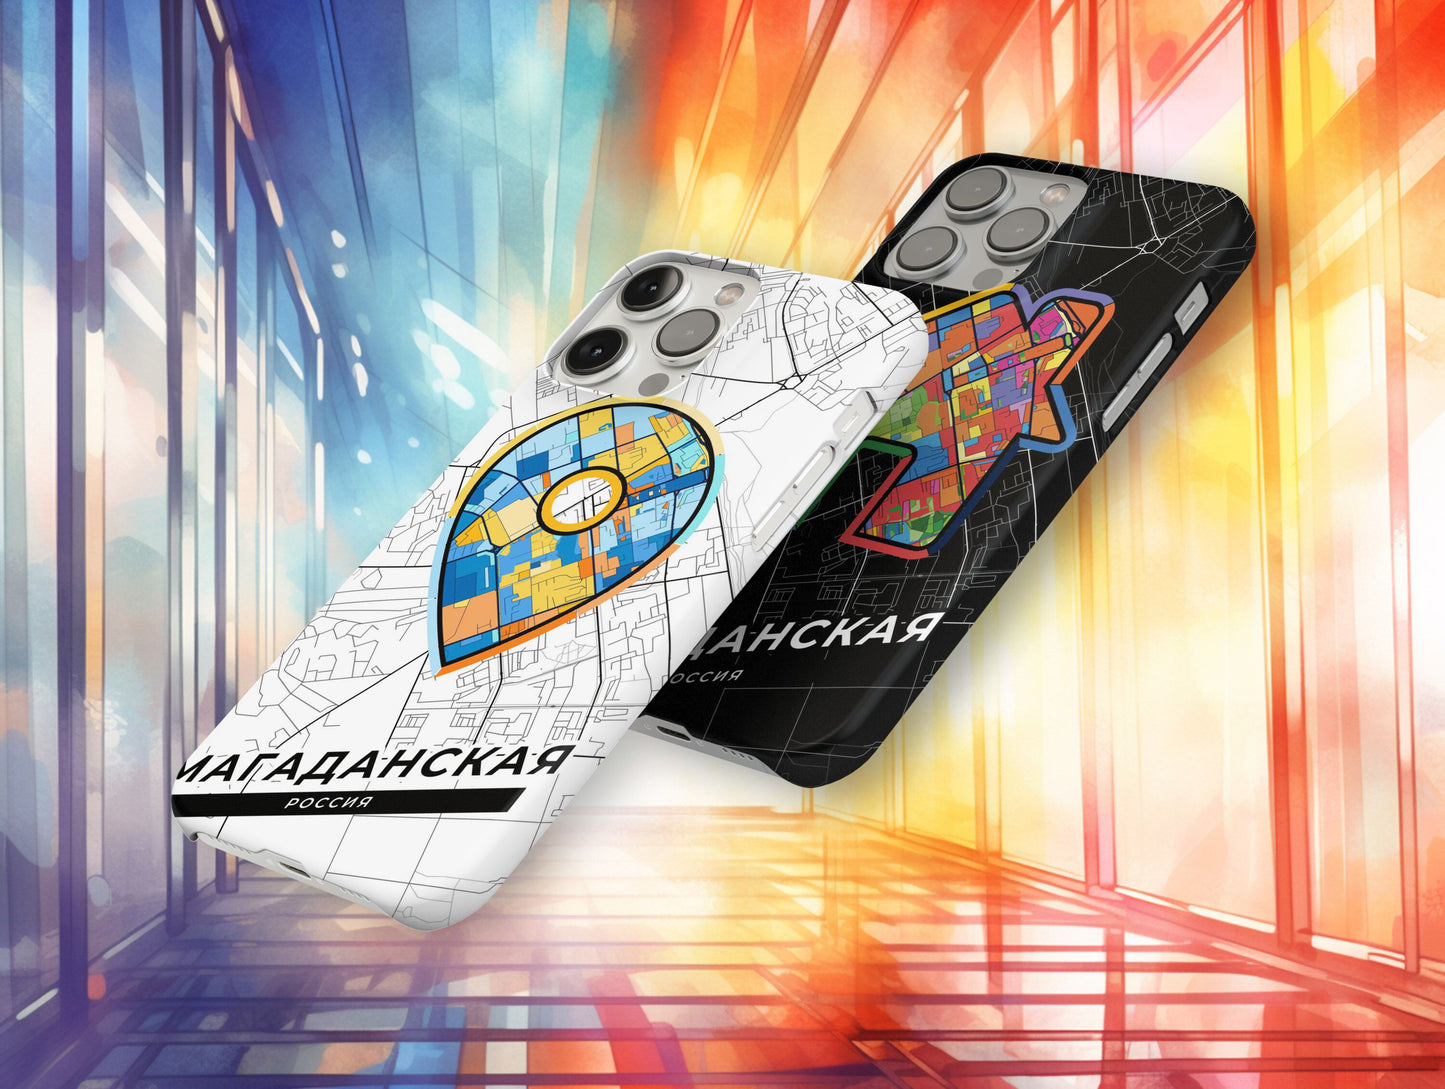 Magadan Russia slim phone case with colorful icon. Birthday, wedding or housewarming gift. Couple match cases.